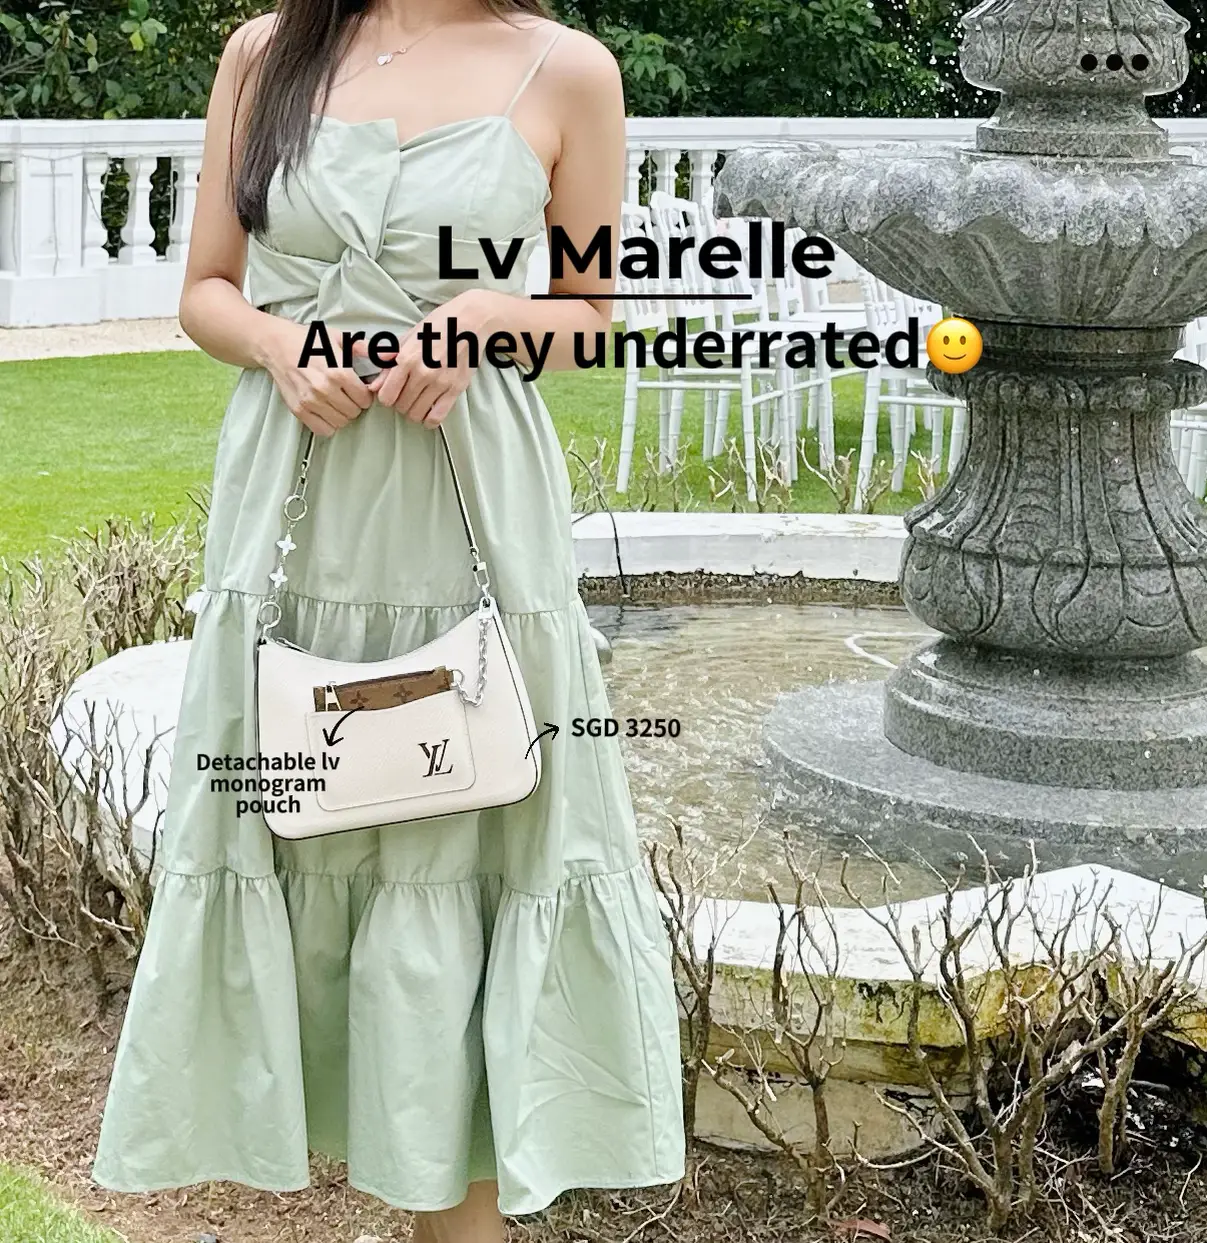 Ultimate Guide to Louis Vuitton MARELLE Bags + Marelle Tote MM Detailed  Review *MUST WATCH* 